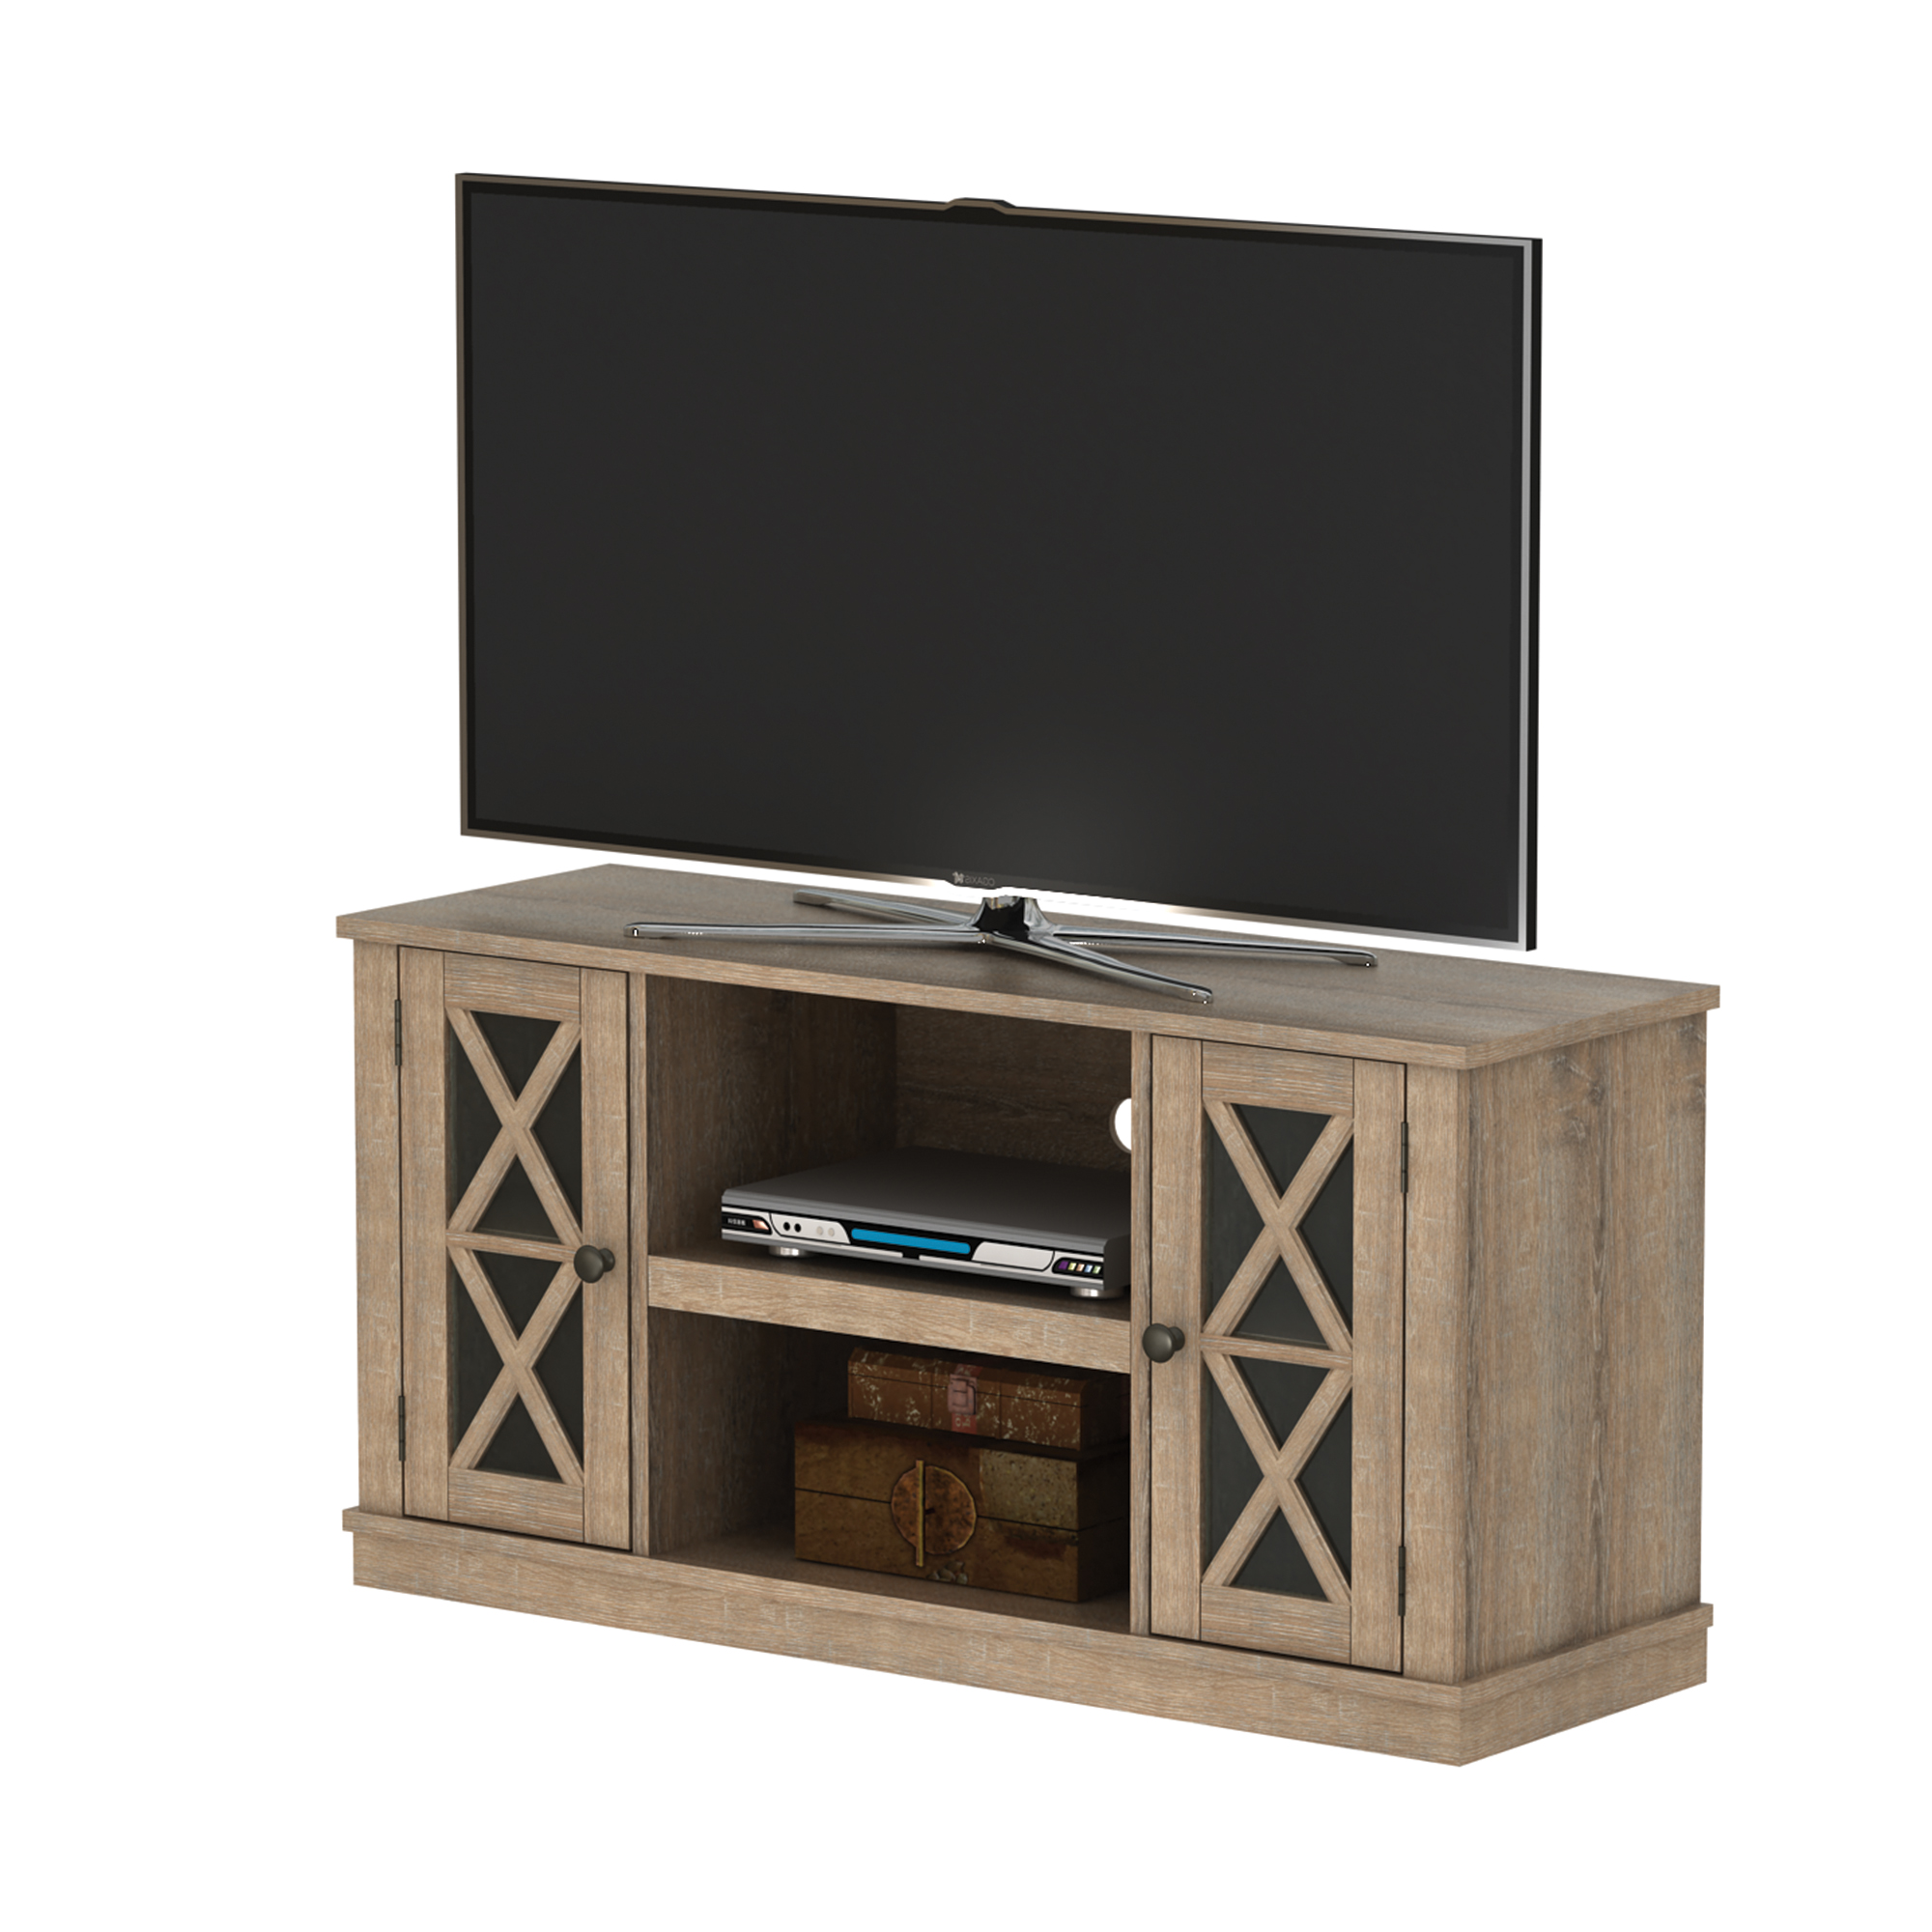 Twin Star Luxe Stanton Ridge TV Stand for TVs up to 55", Oak - image 3 of 8